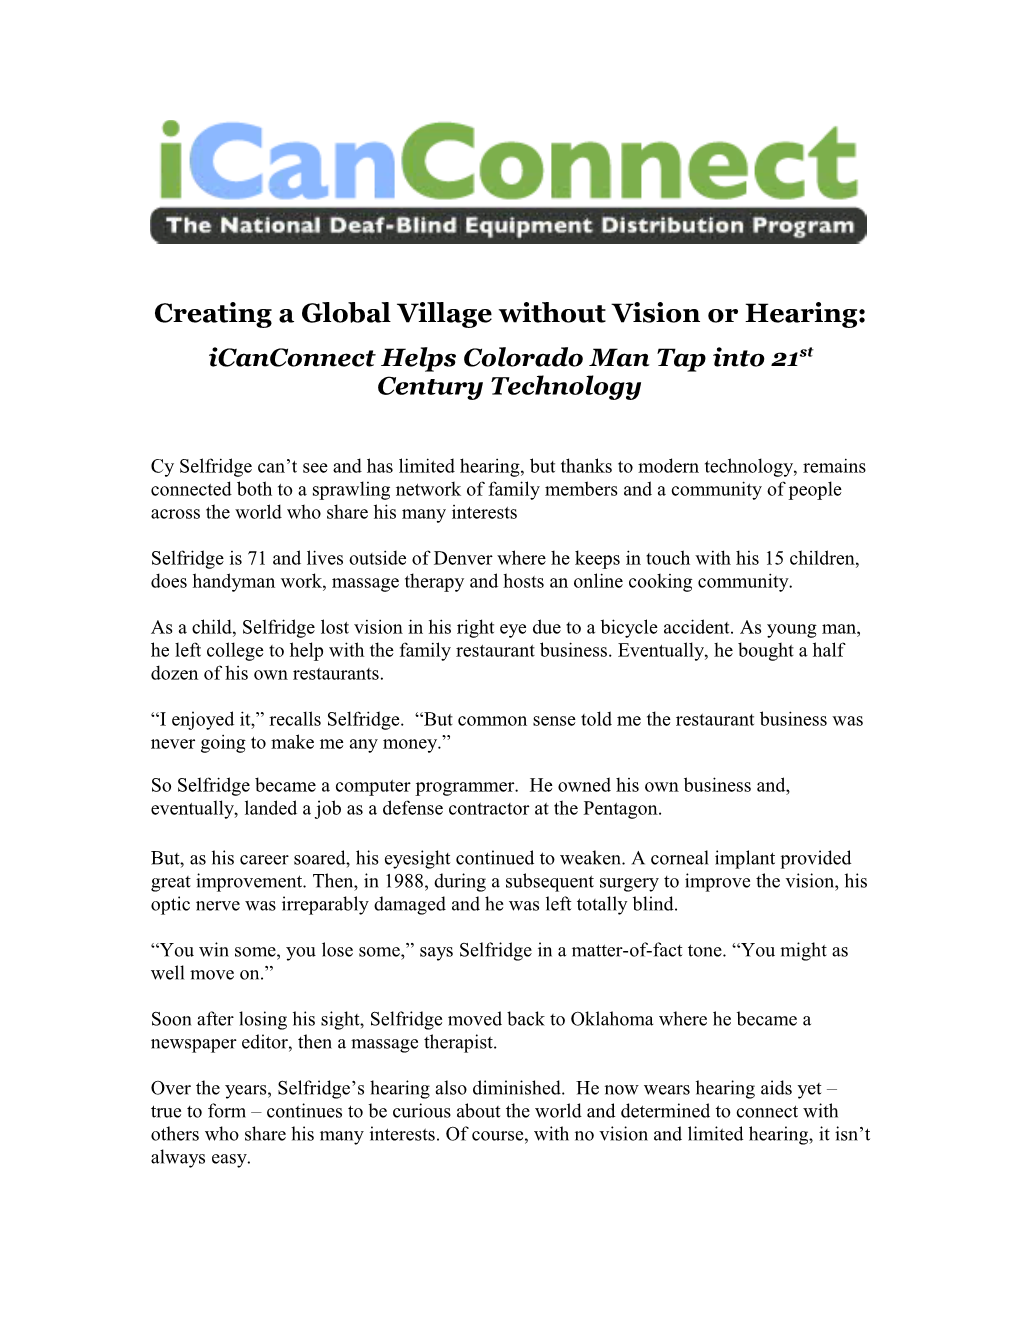 Creating a Global Village Without Vision Or Hearing